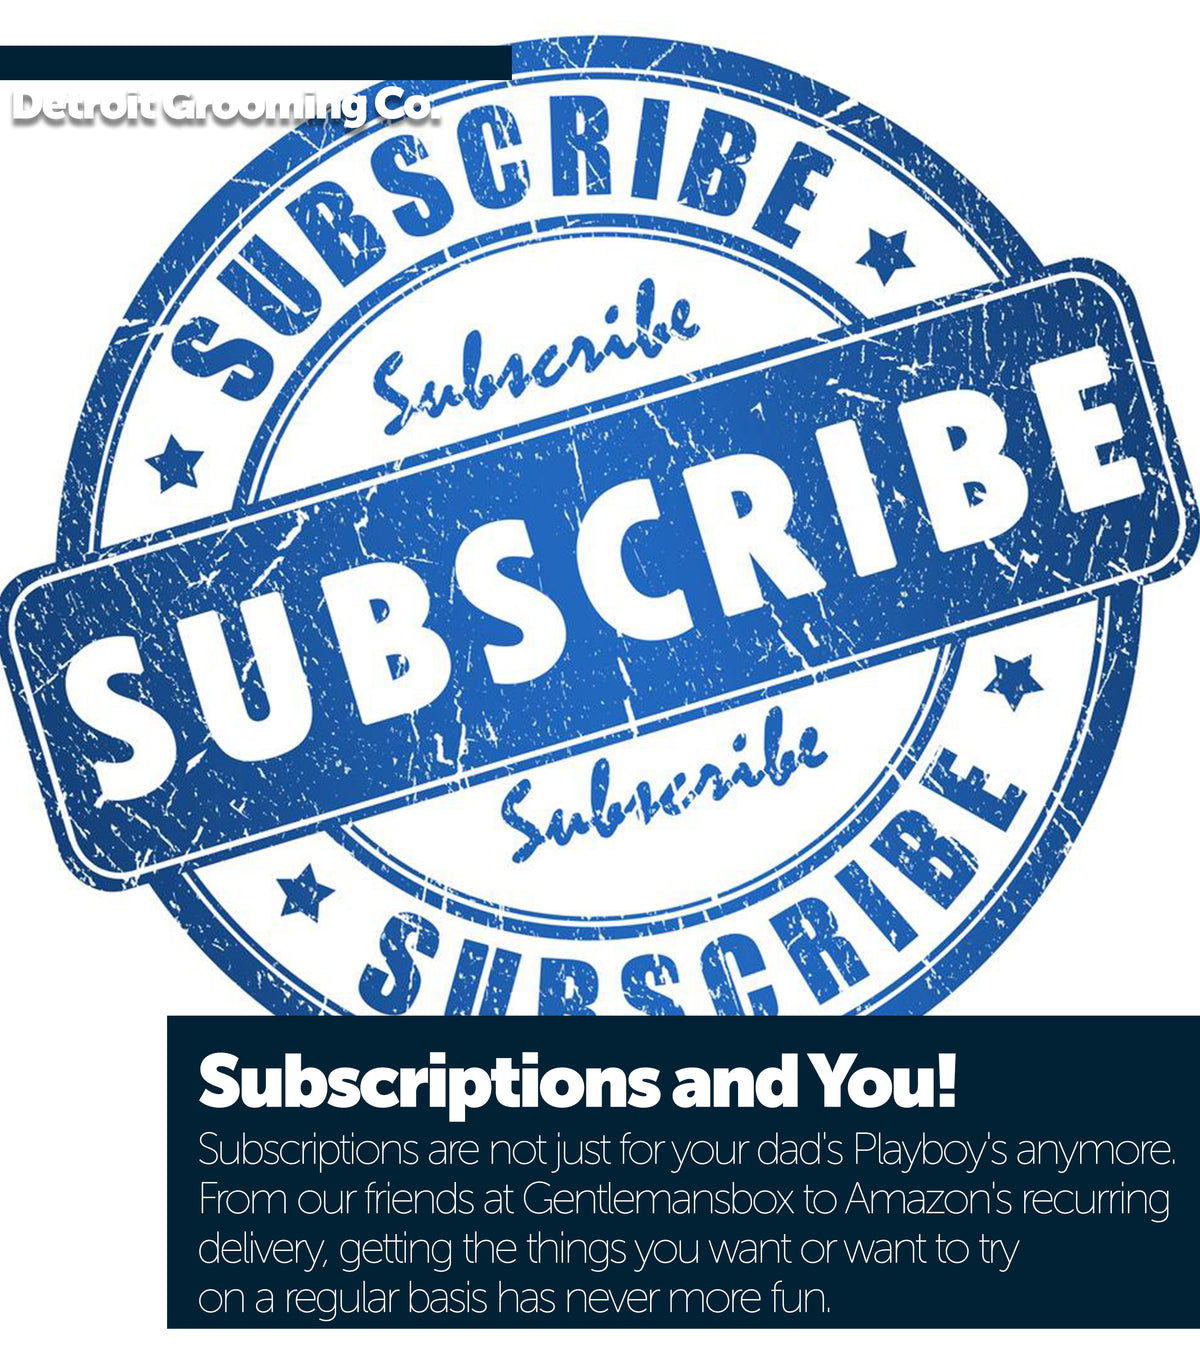 Subscriptions and You